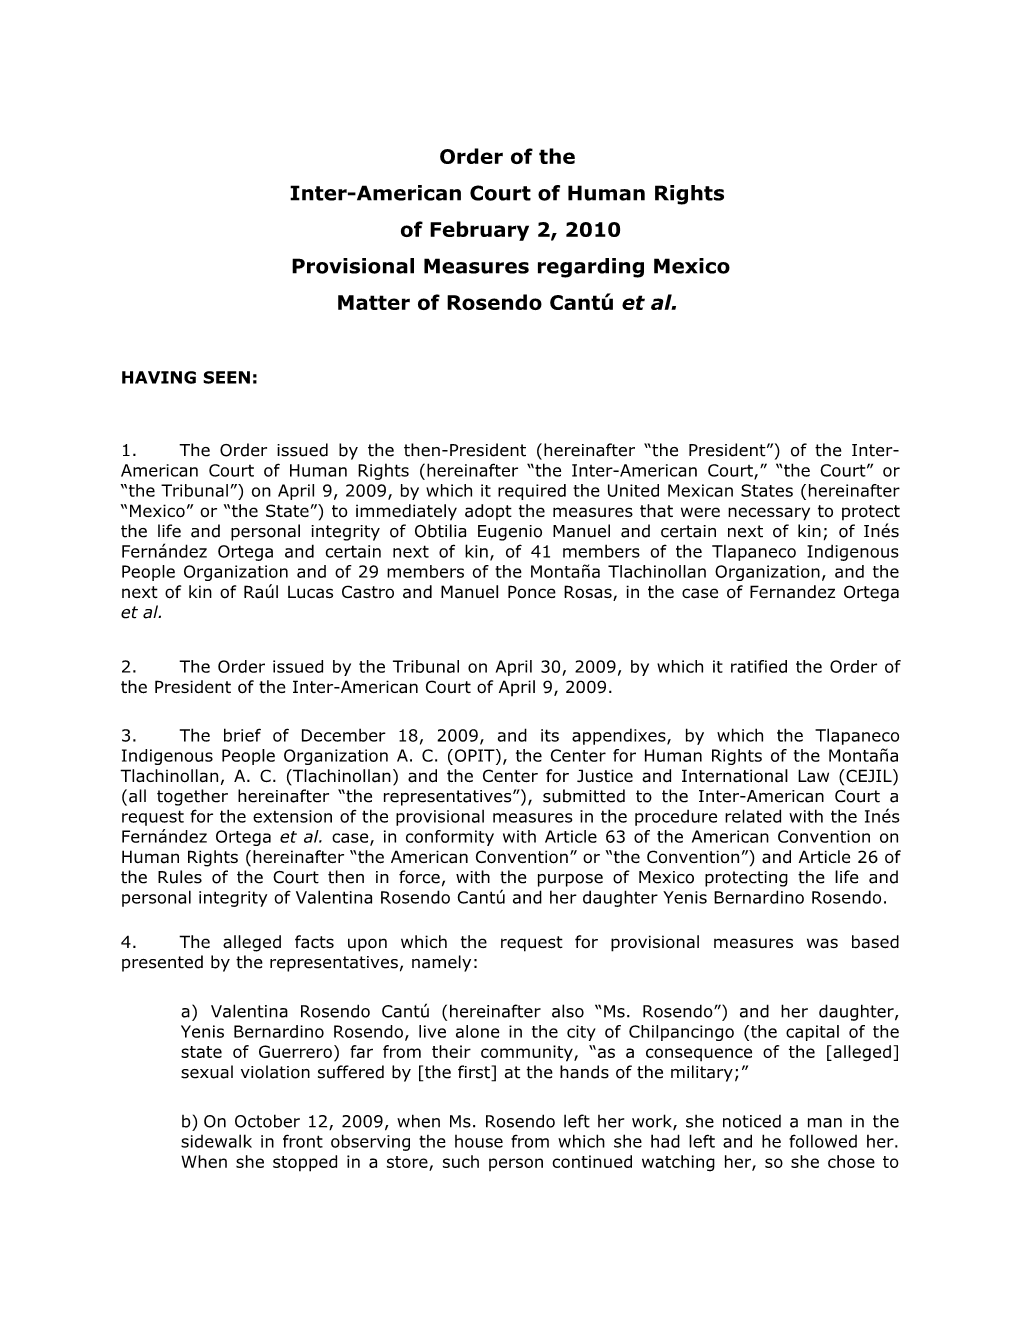 Inter-American Court of Human Rights s32